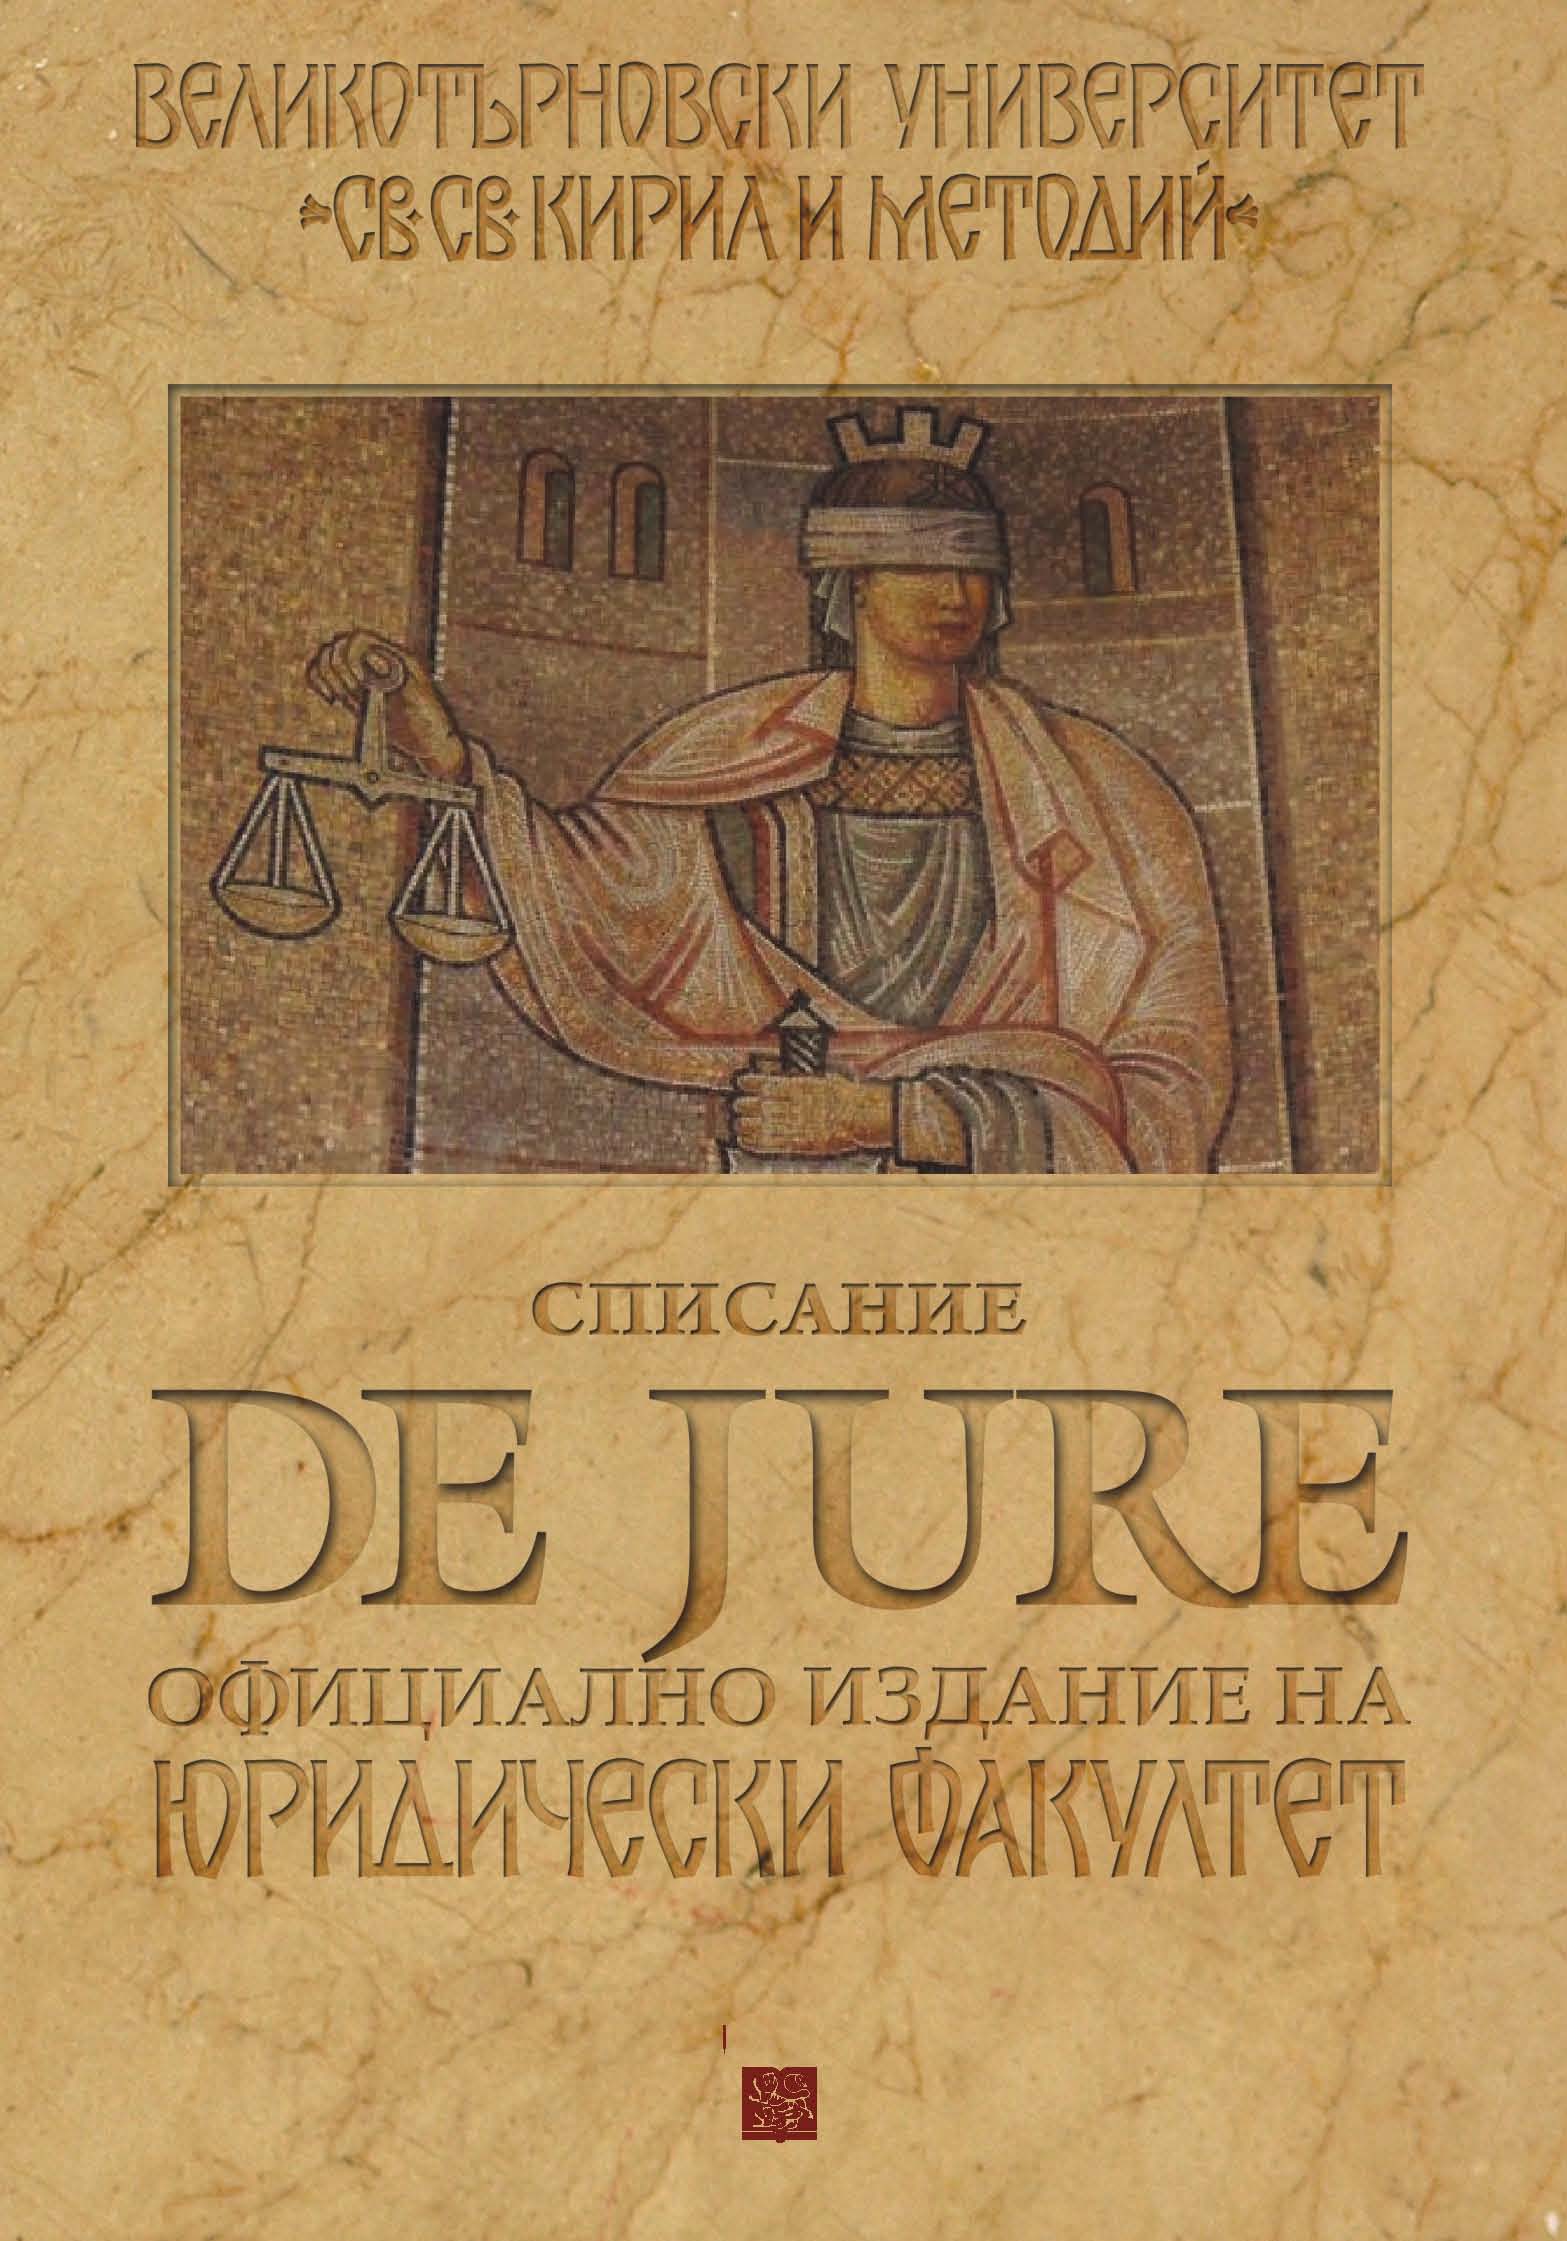 Content of the concept of  “high head of all military forces” in the Turnovo constitution Cover Image